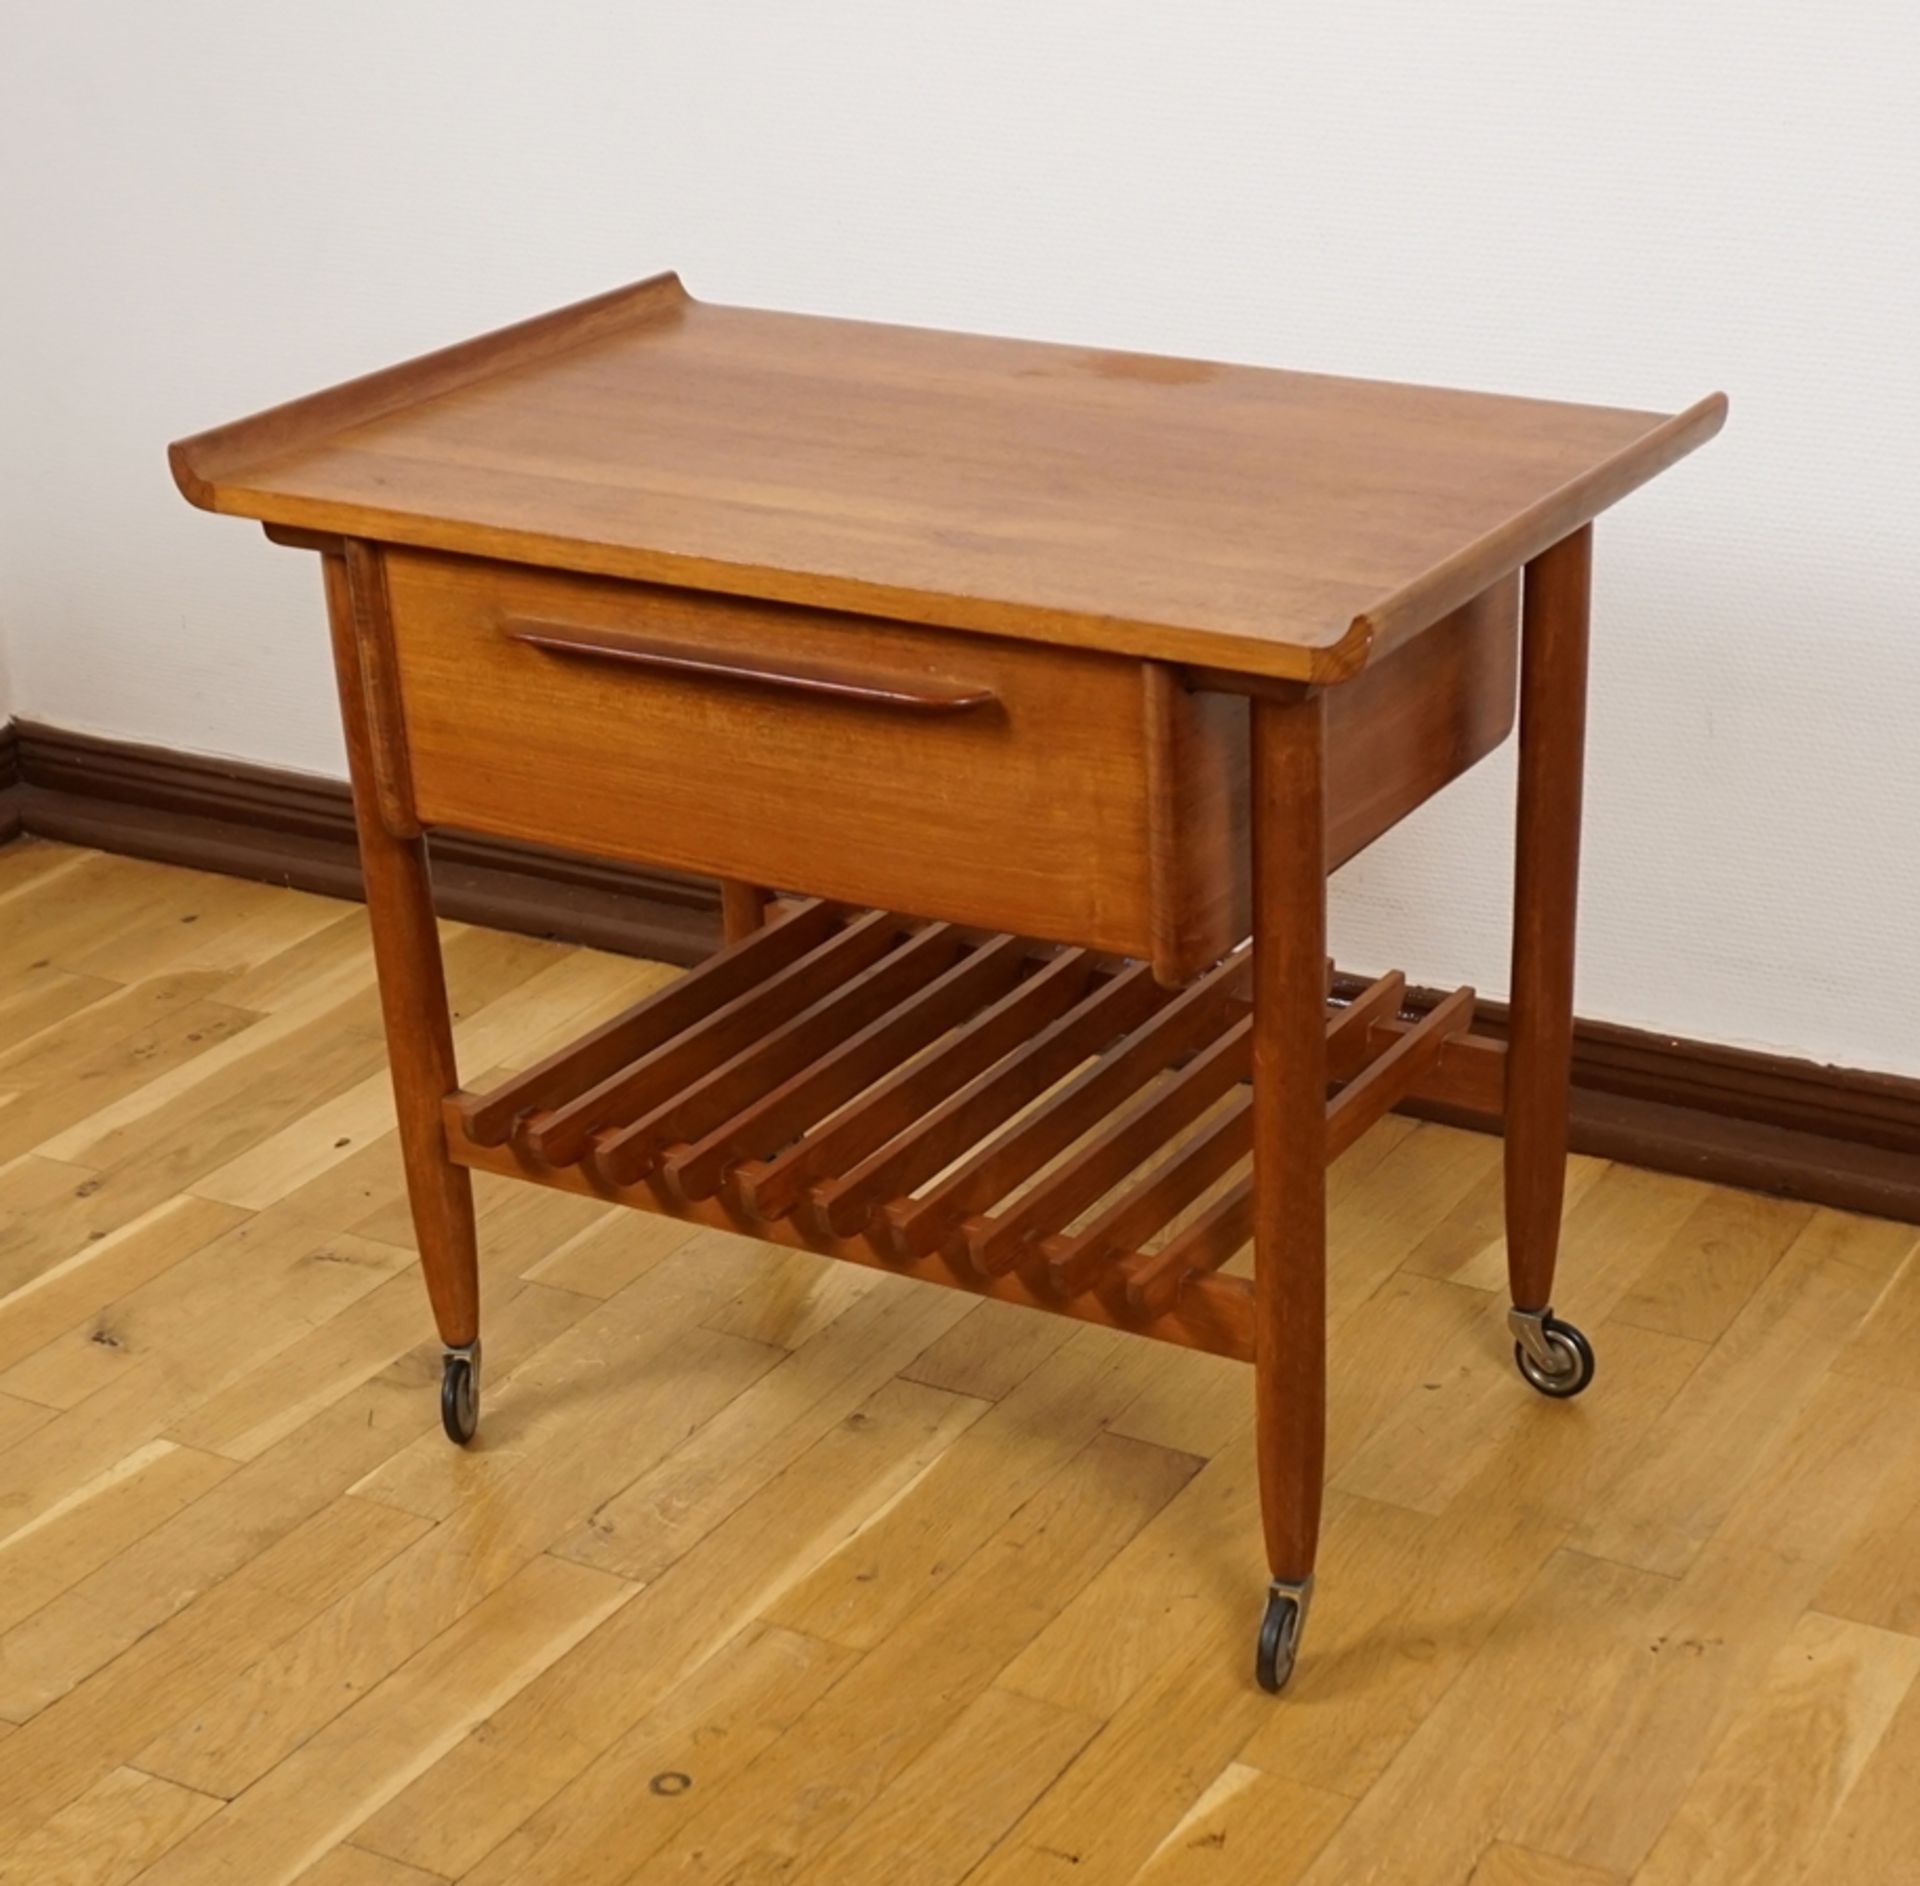 Sewing table with drawer, Denmark, 1960s - Image 2 of 5